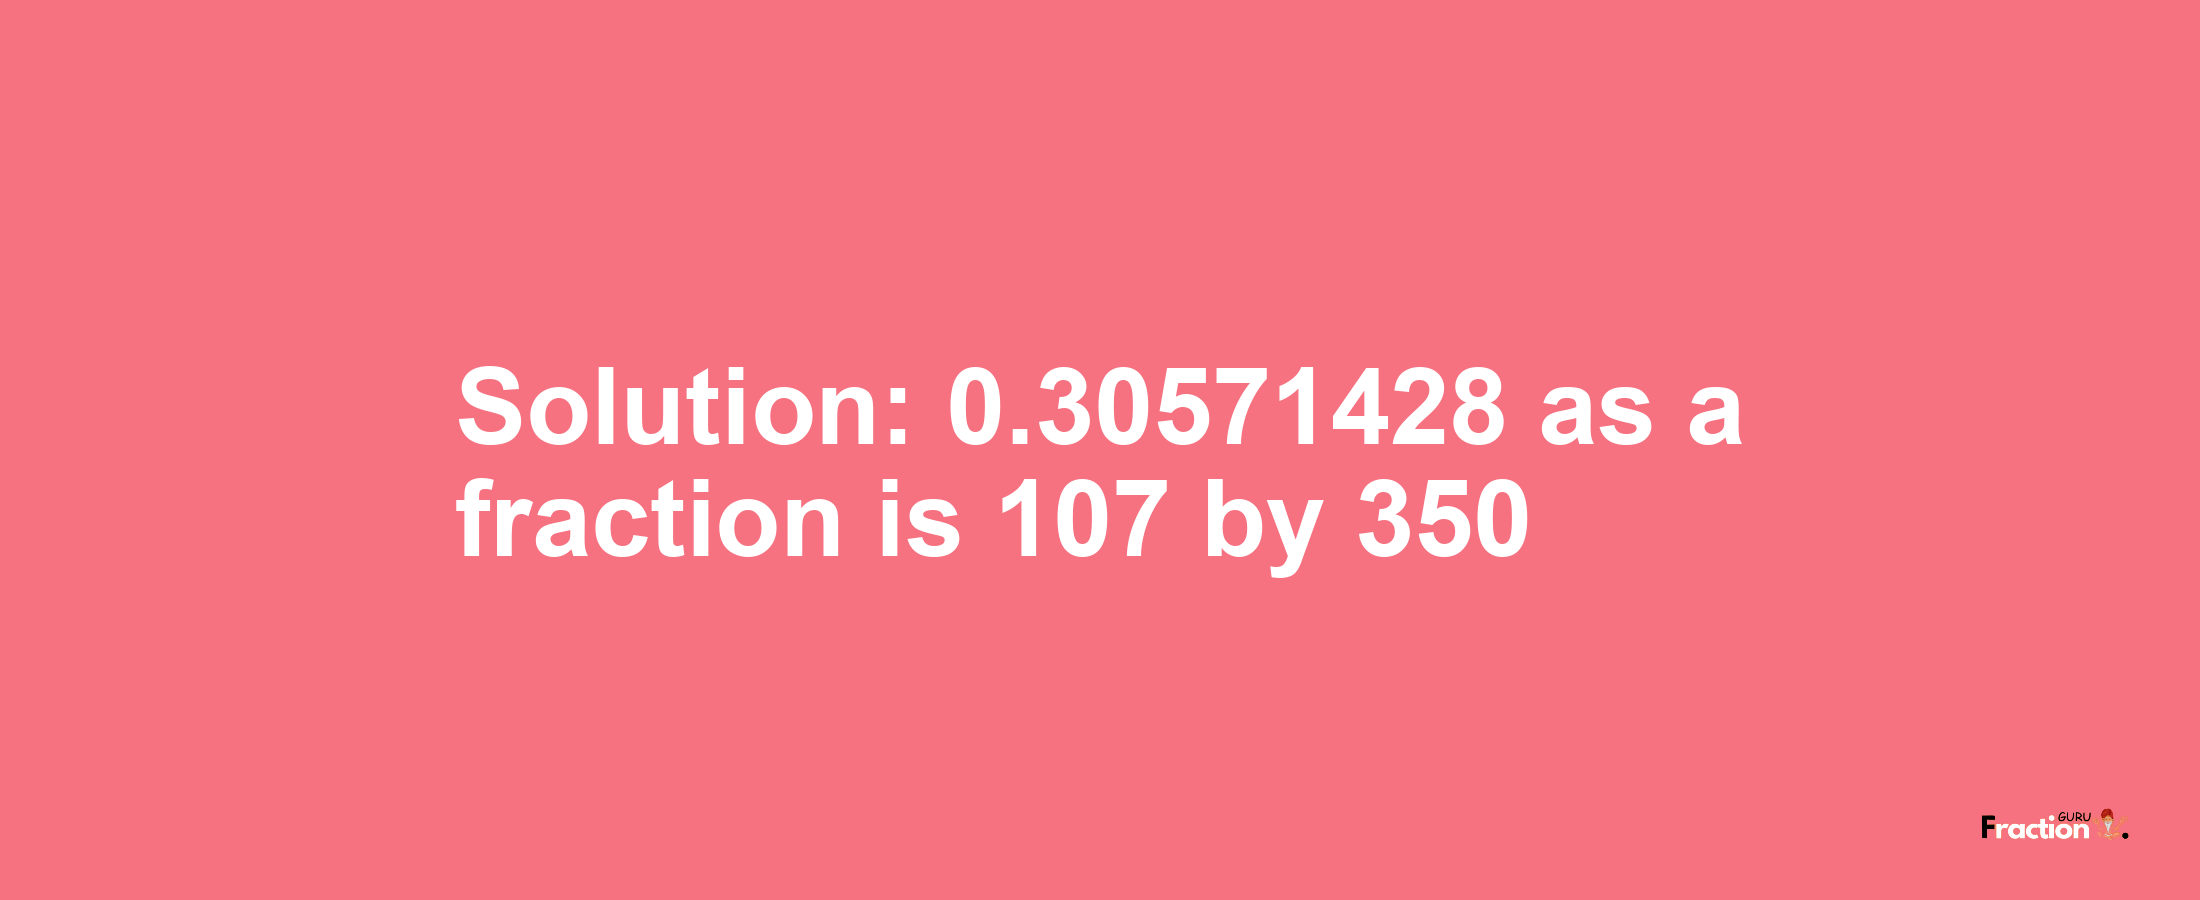 Solution:0.30571428 as a fraction is 107/350